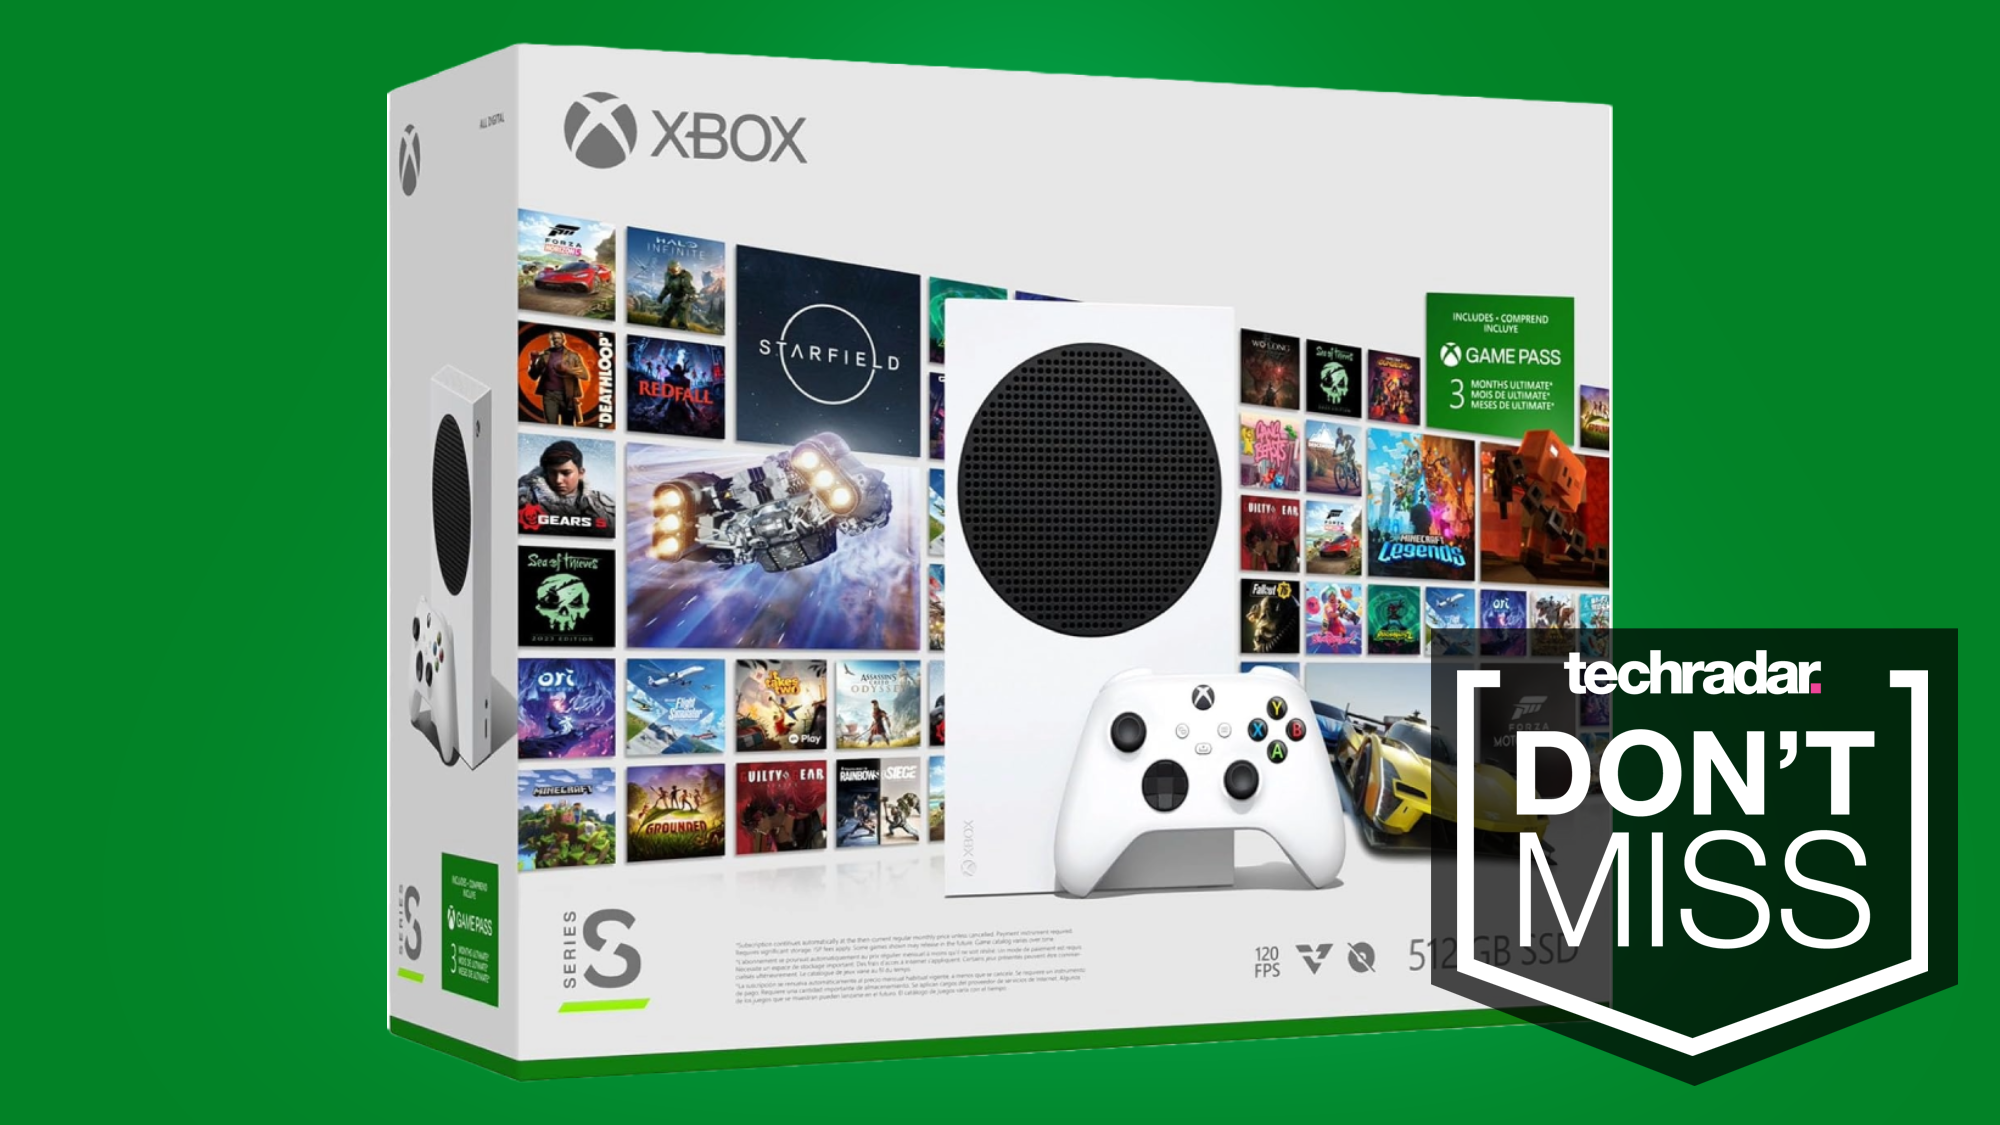 This Xbox Series S Starter Bundle contains everything you need to play top games this Black Friday